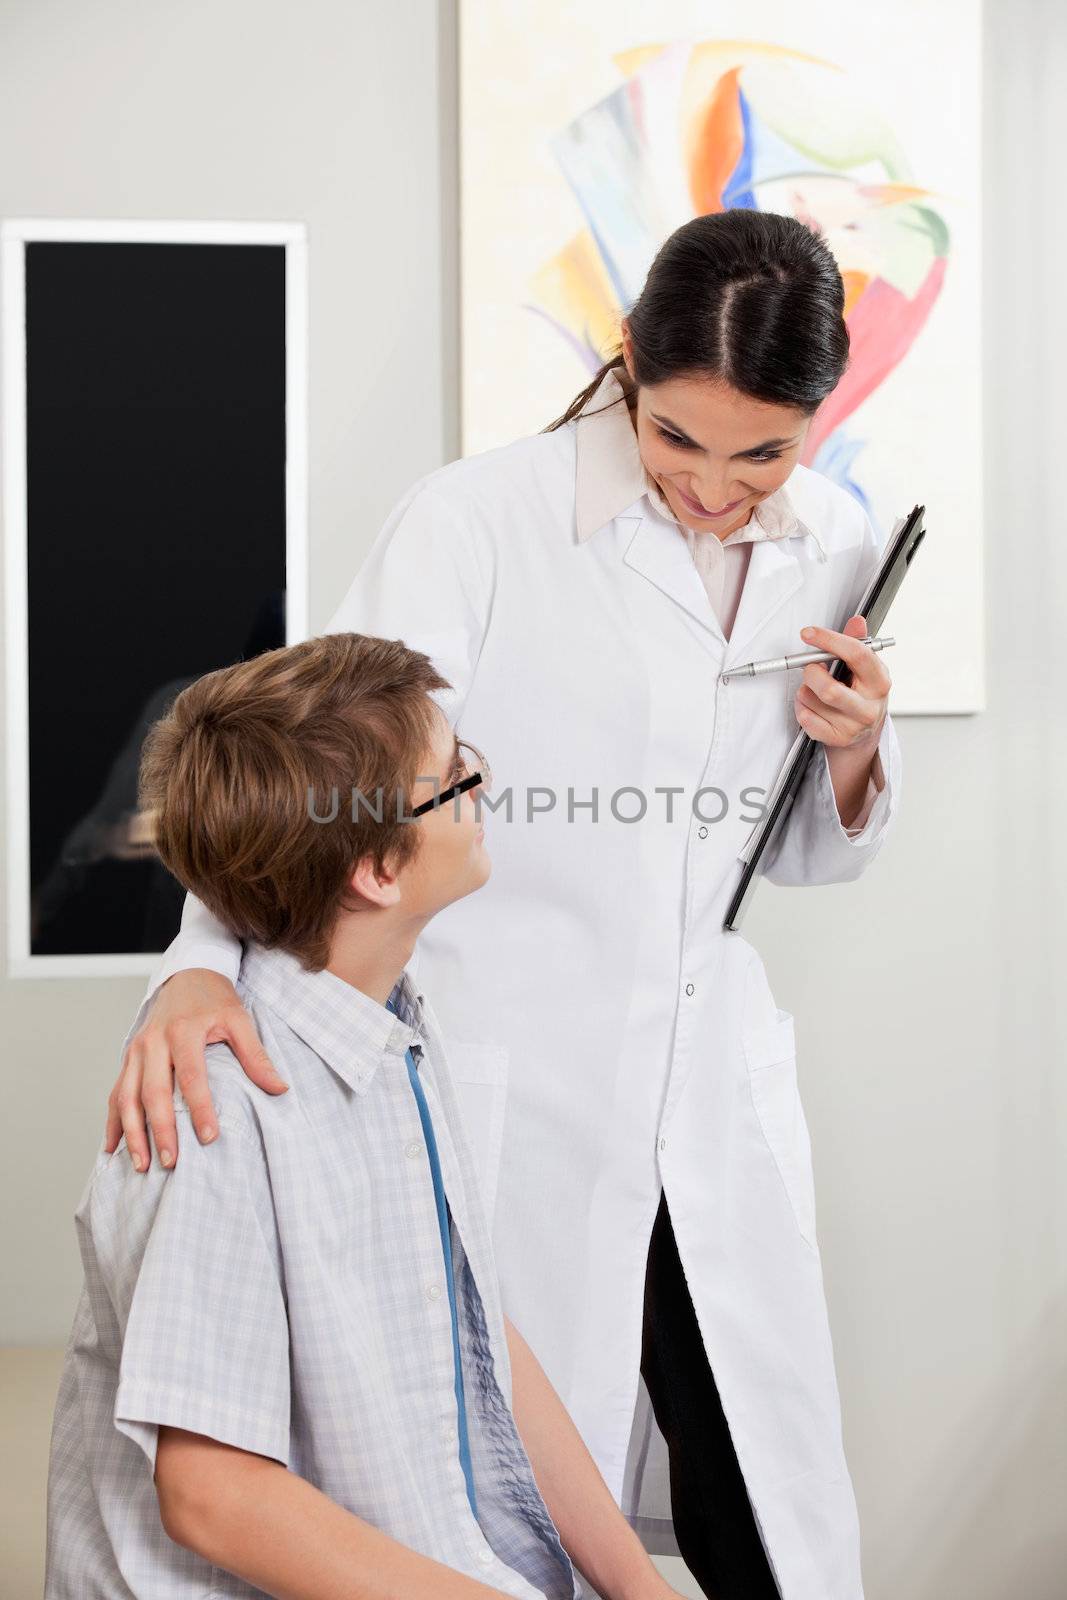 Boy With Vision Problems Consulting To Optometrist by leaf